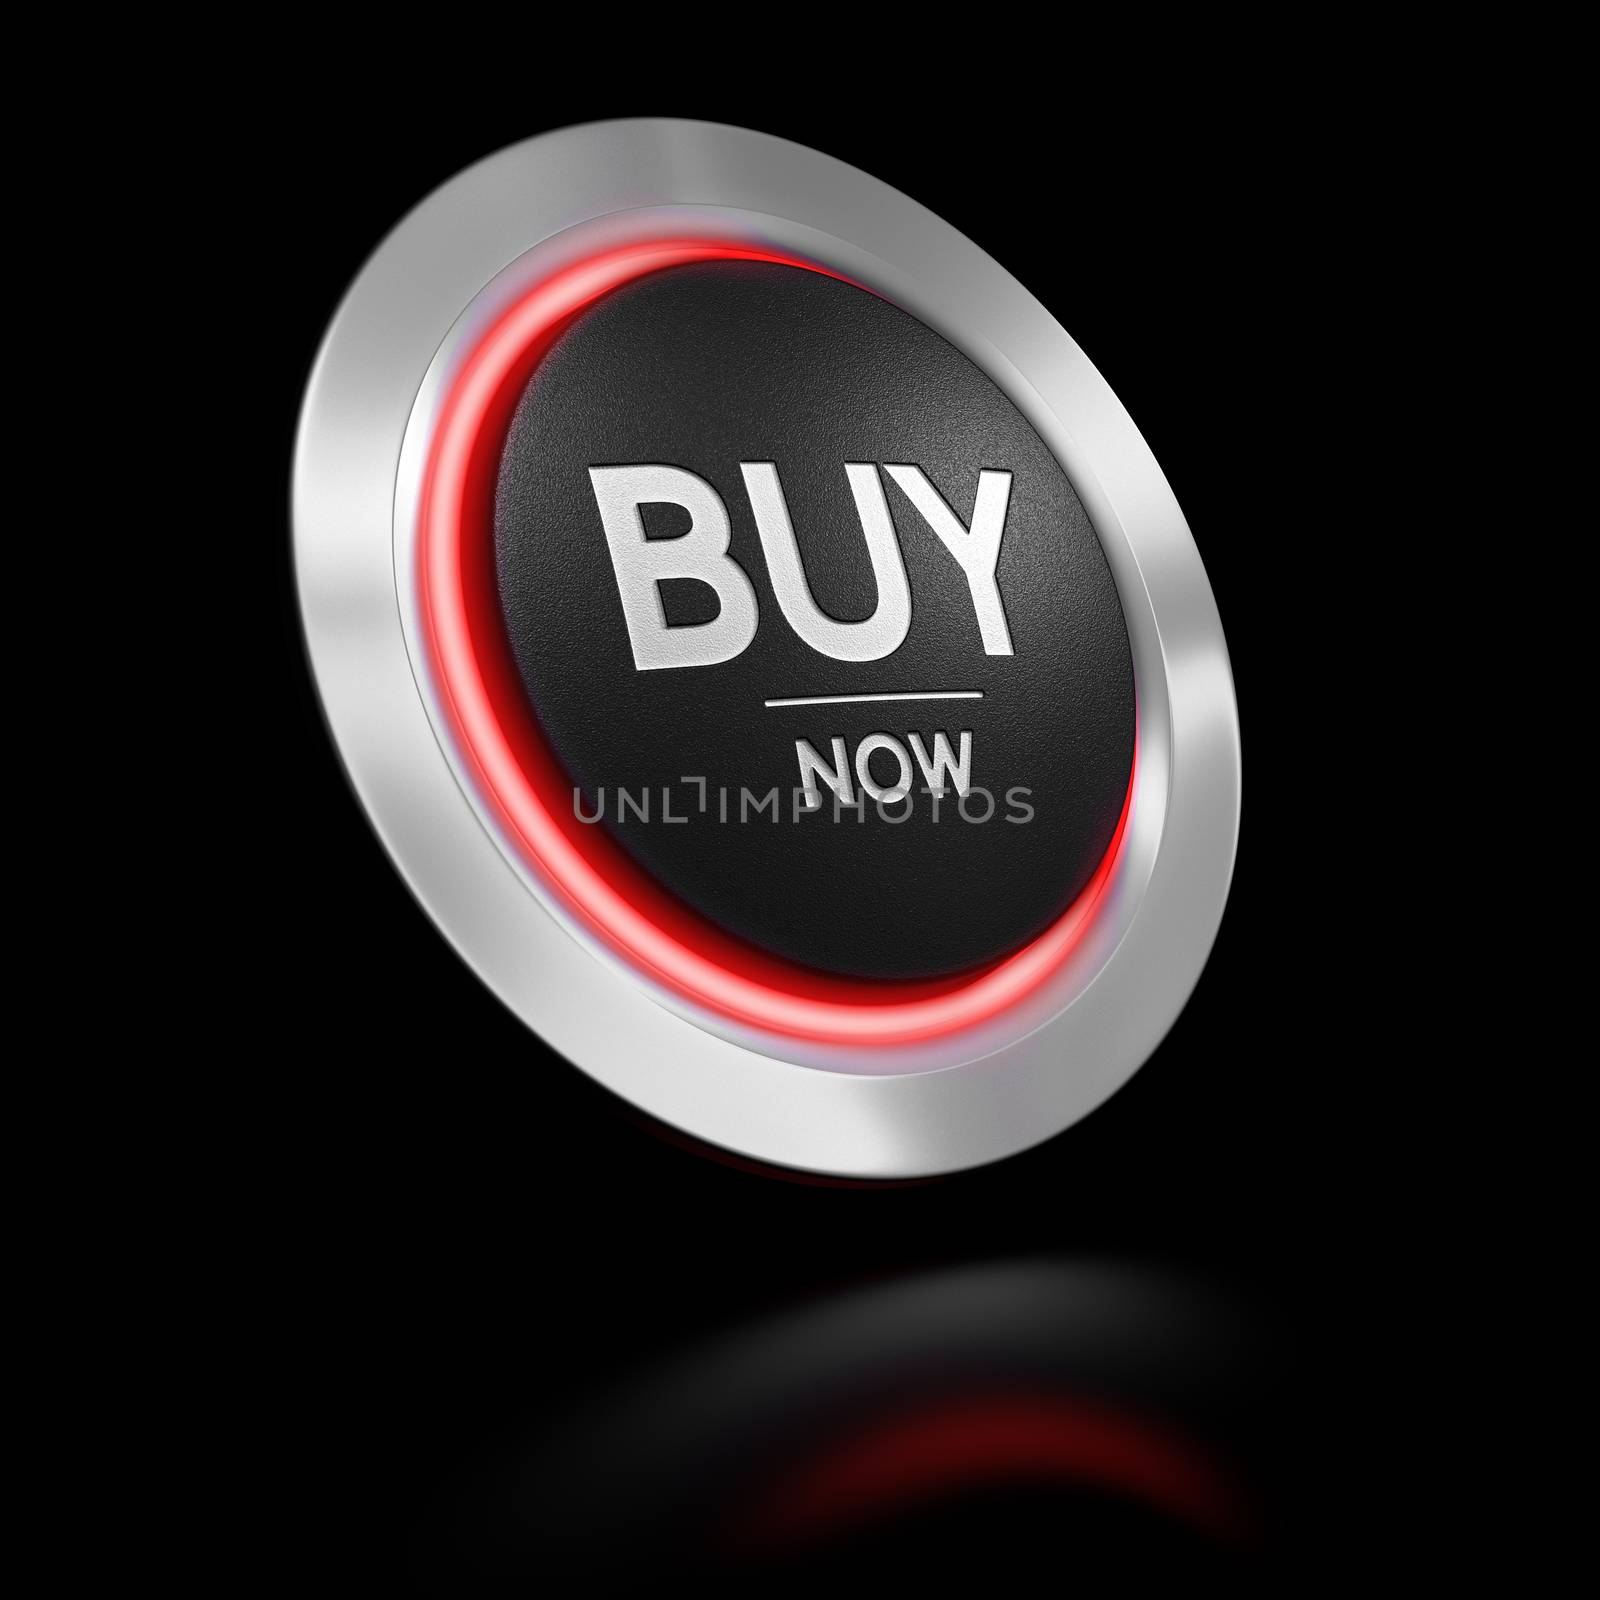 Call to Action Button, Buy Now Over Black Background by Olivier-Le-Moal